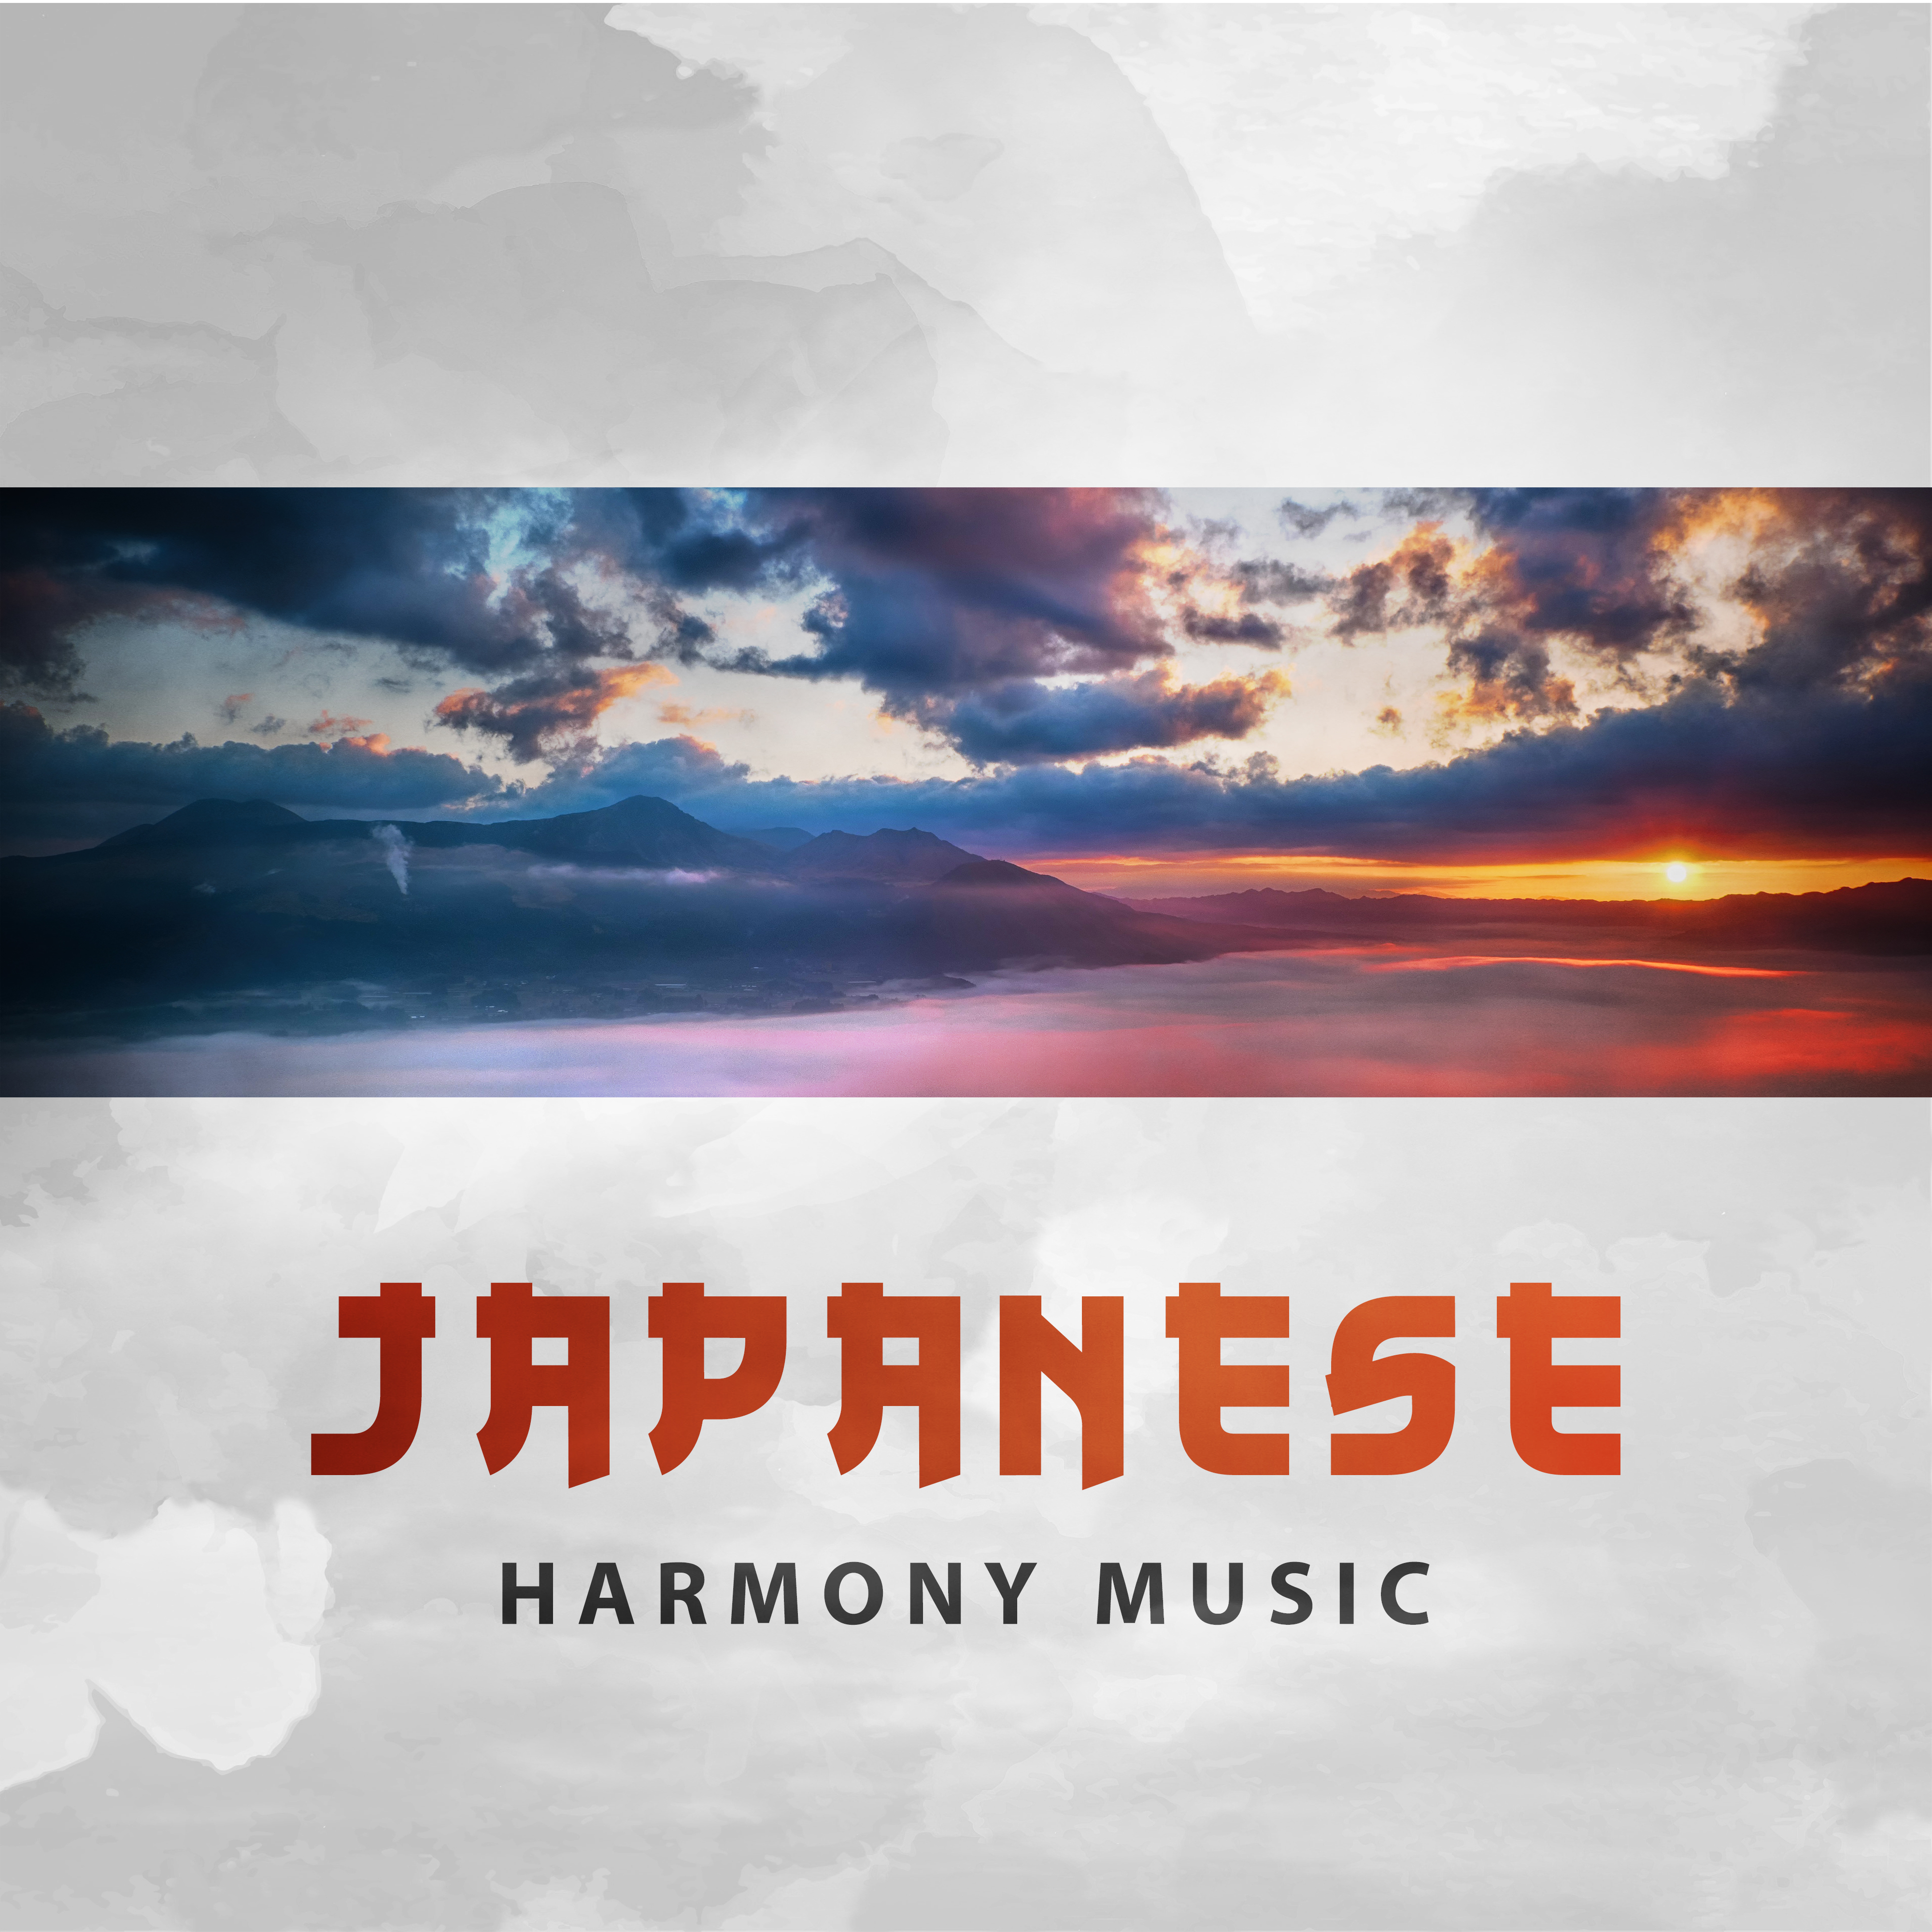 Japanese Harmony Music – Relaxing Music, Zen, Deep Meditation, Healing New Age, Pure Sounds of Nature